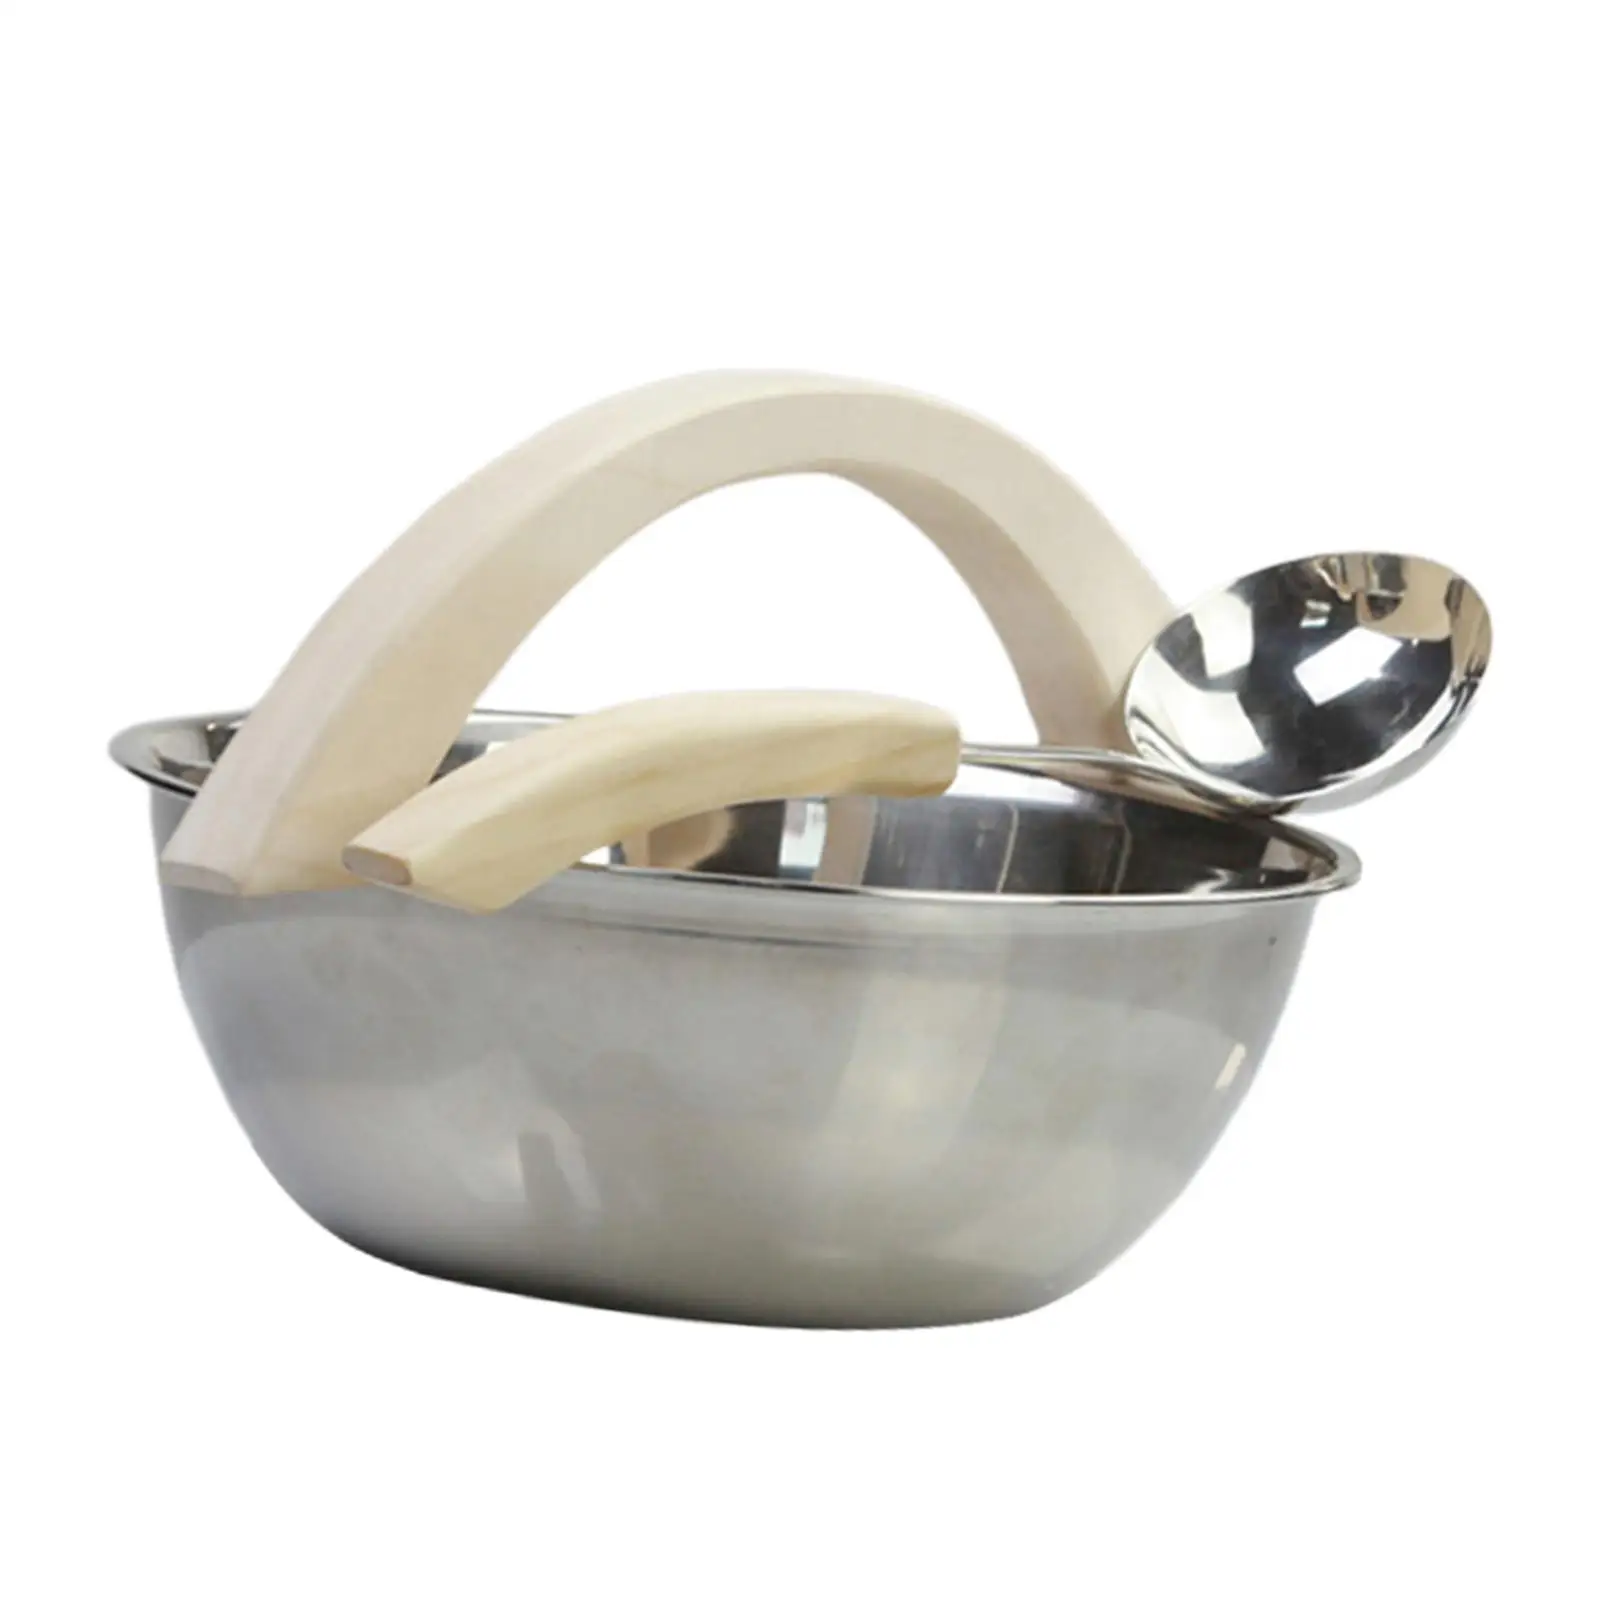 7L  Barrel Metal Washbowl with Matching  Ladle  Room Accessory Wood Handle Large Capacity Practical Use Accessory